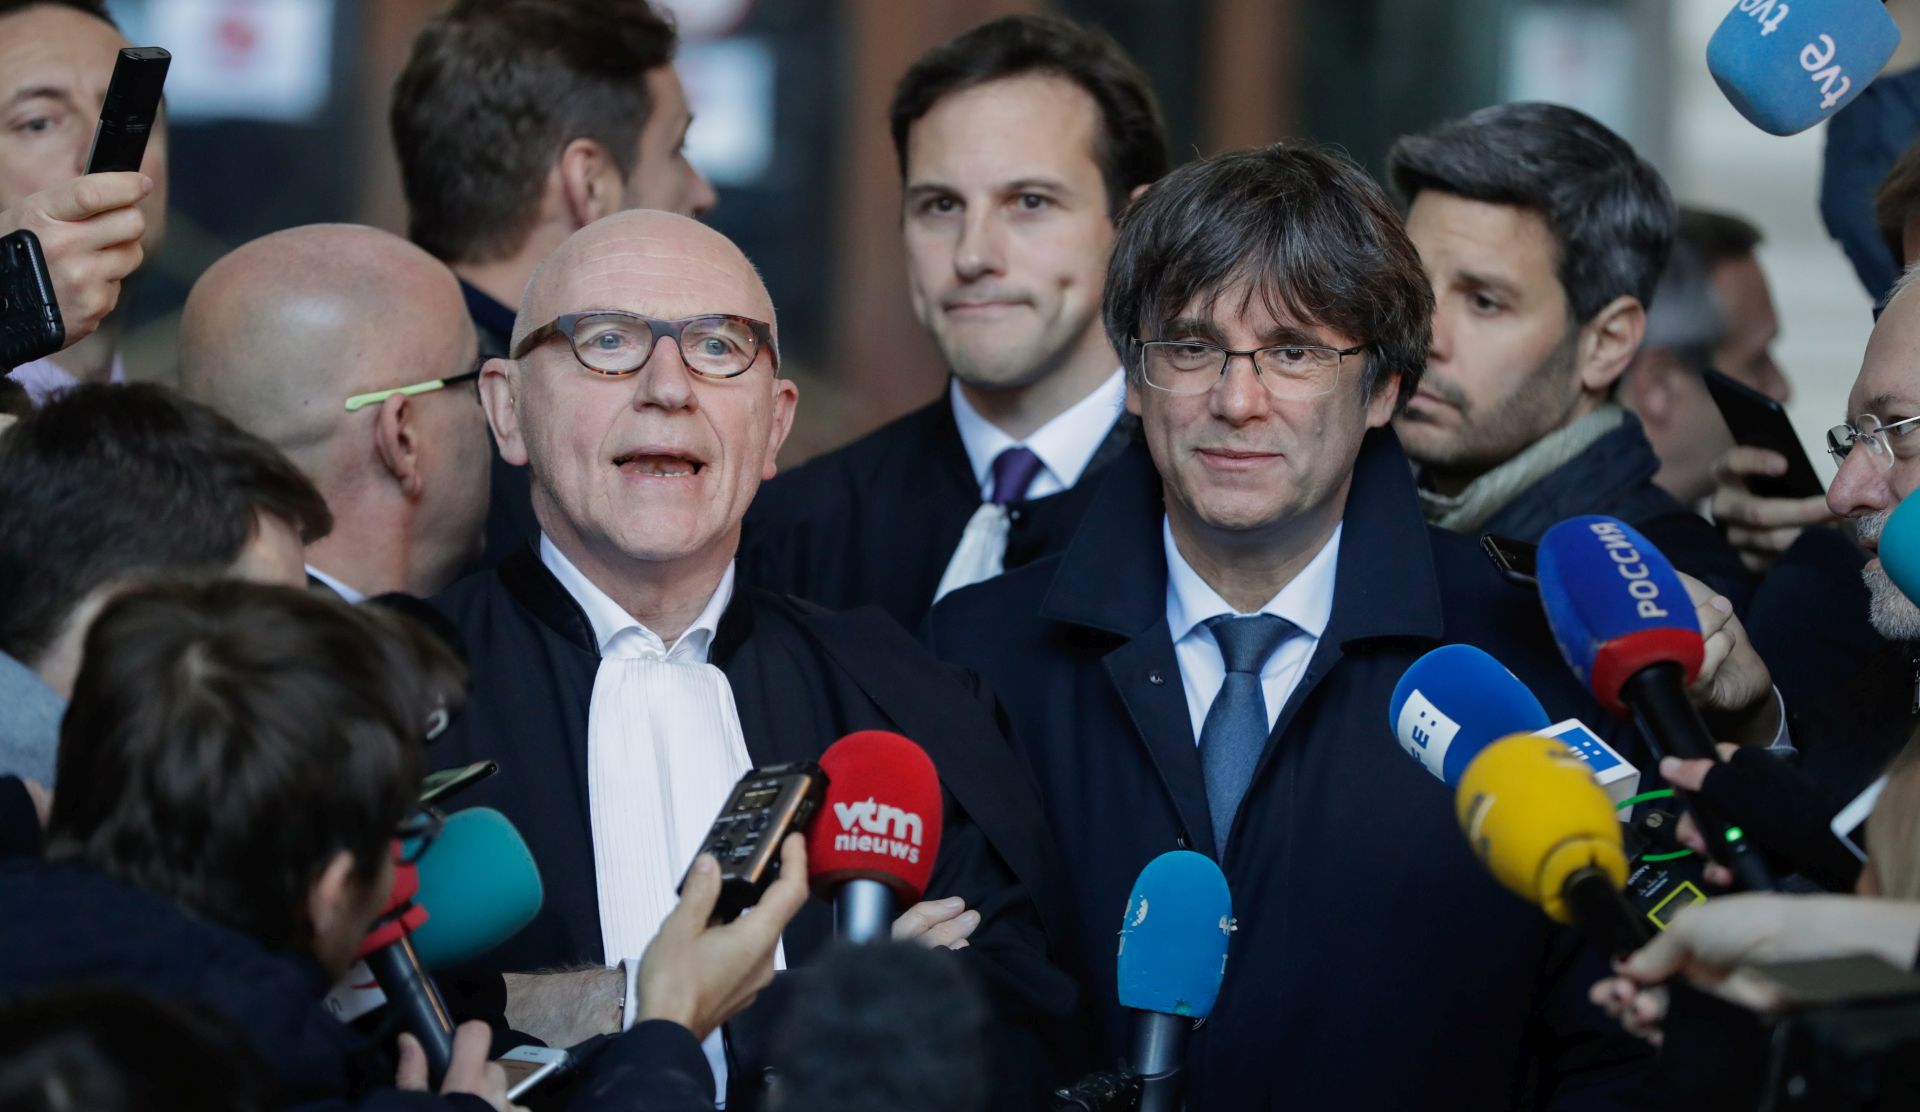 epa07957549 Lawyer Paul Bekaert (L) and former Catalan leader Carles Puigdemont (C) speak to the press after a hearing at the justice court in Brussels, Belgium, 29 October 2019.  EPA/STEPHANIE LECOCQ